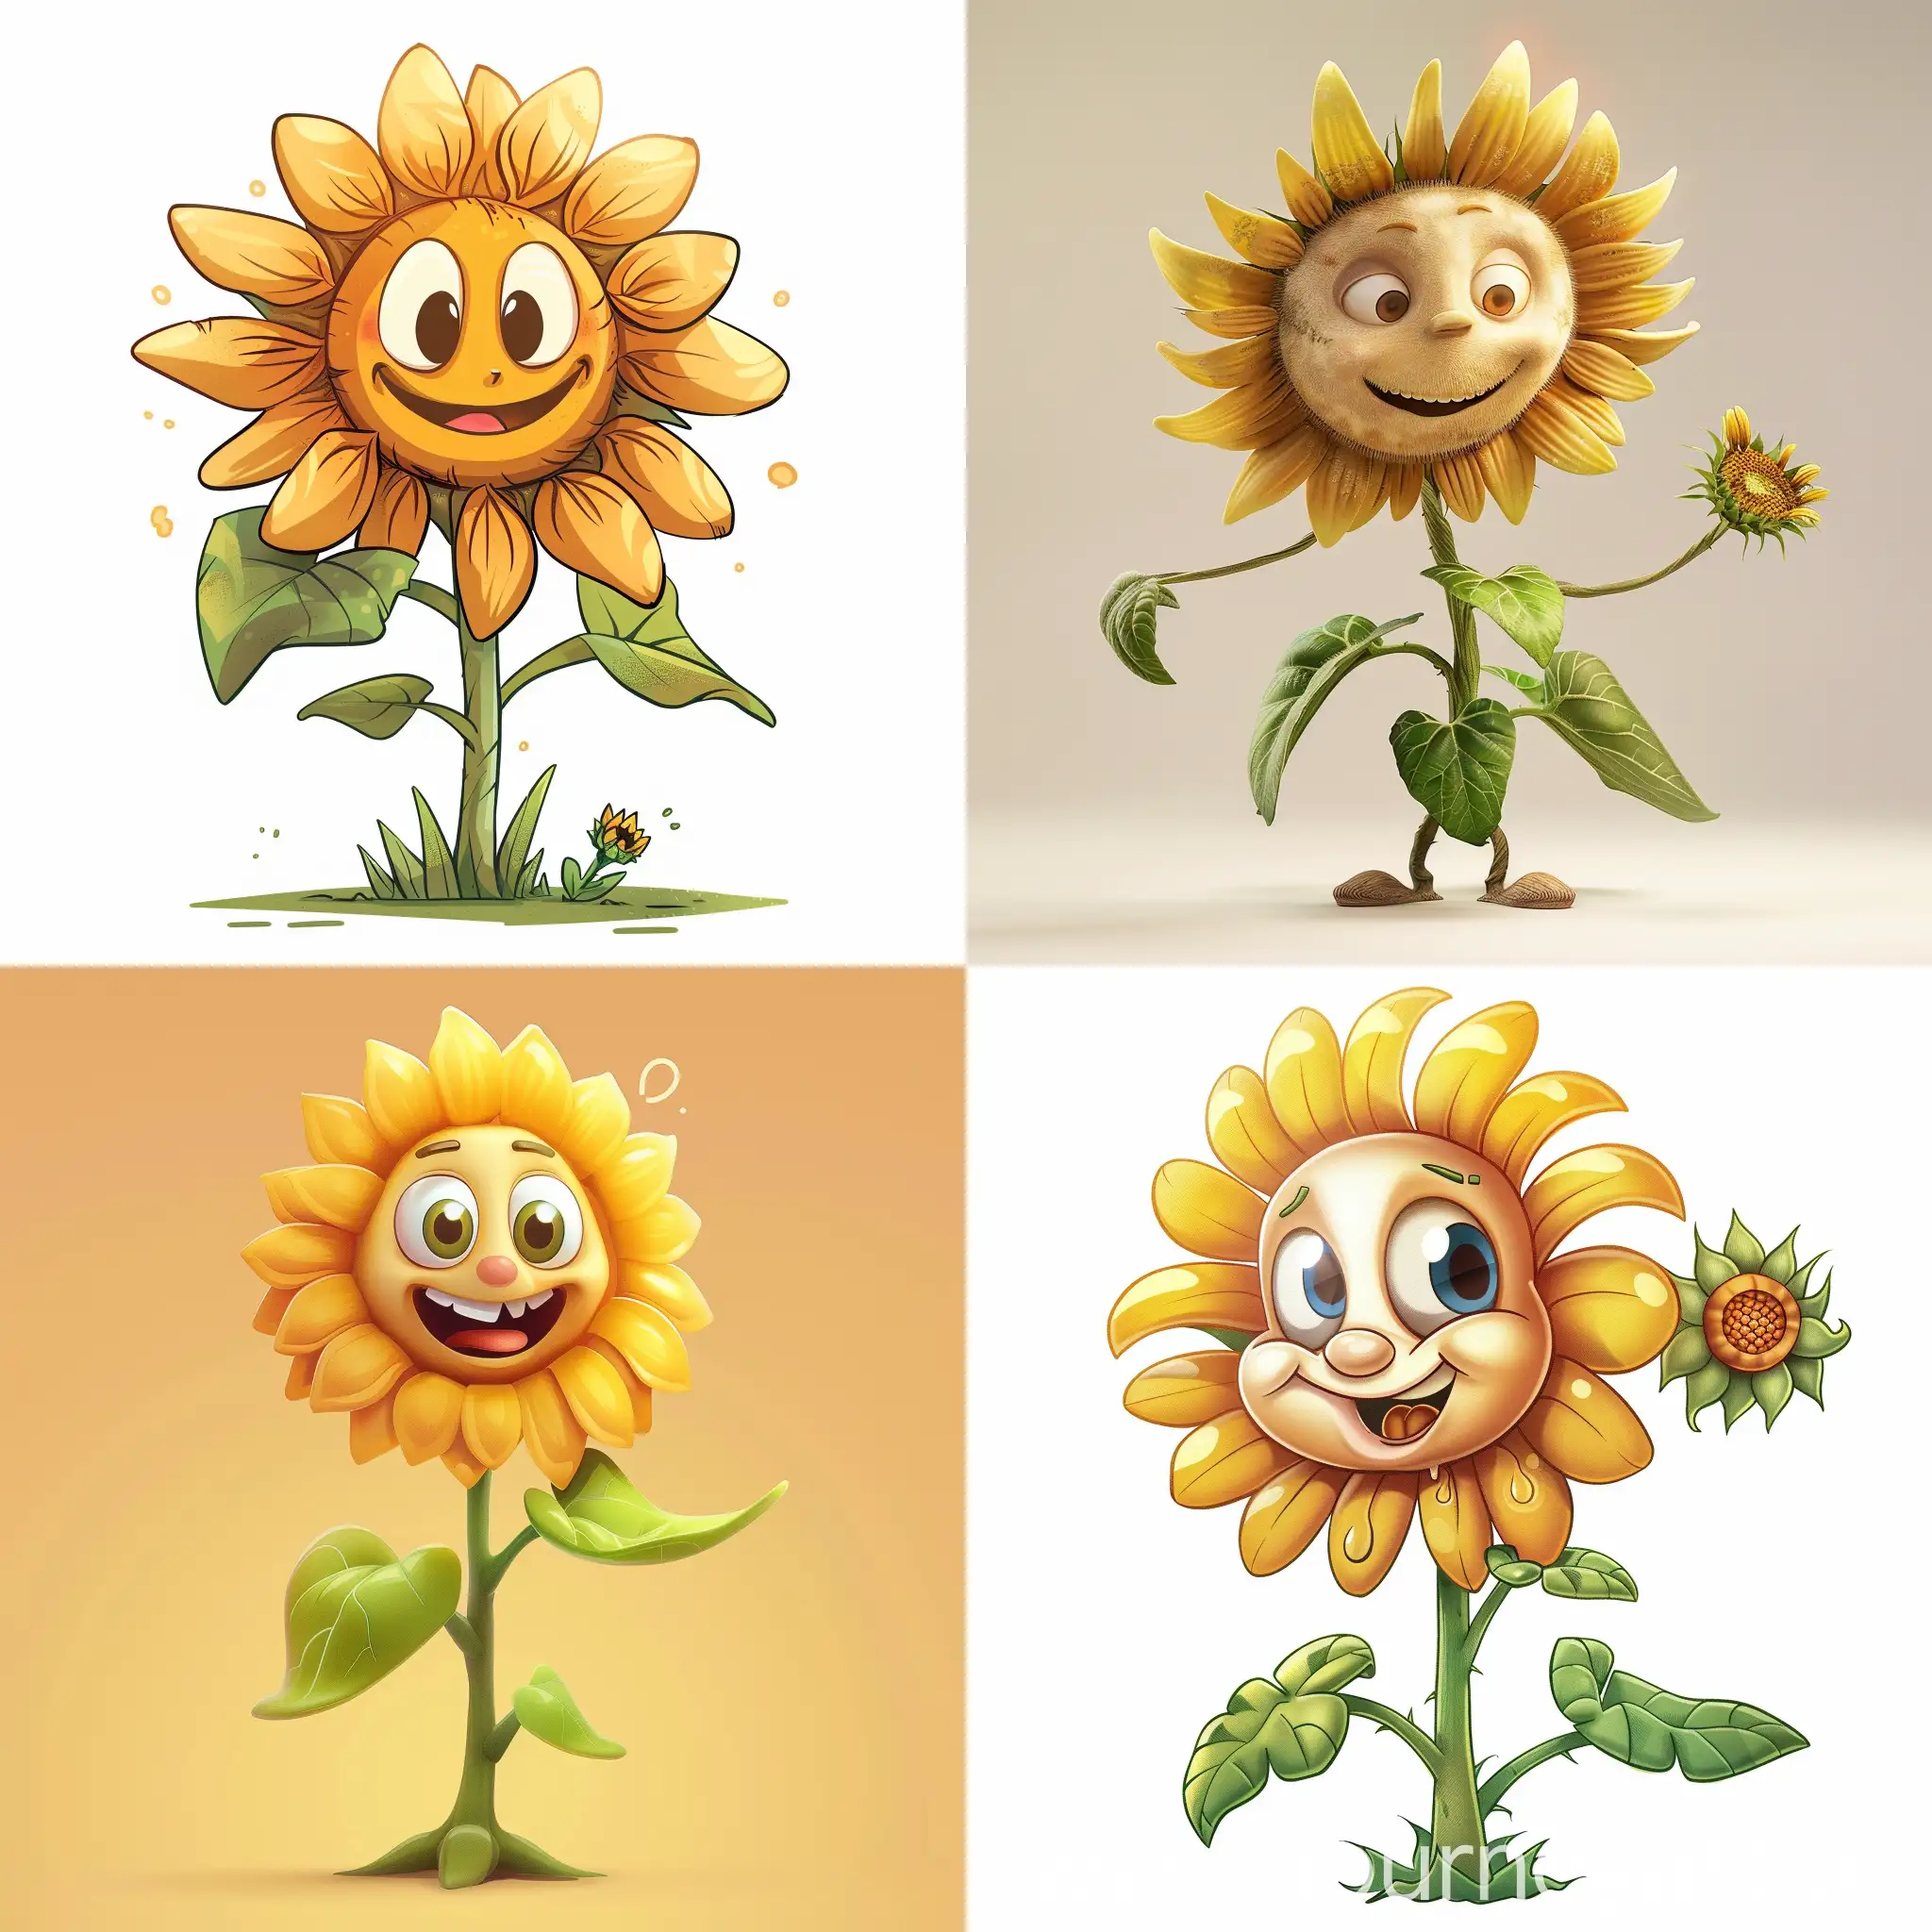 Cheerful-Cartoon-Character-Sunflower-in-Vibrant-Colors